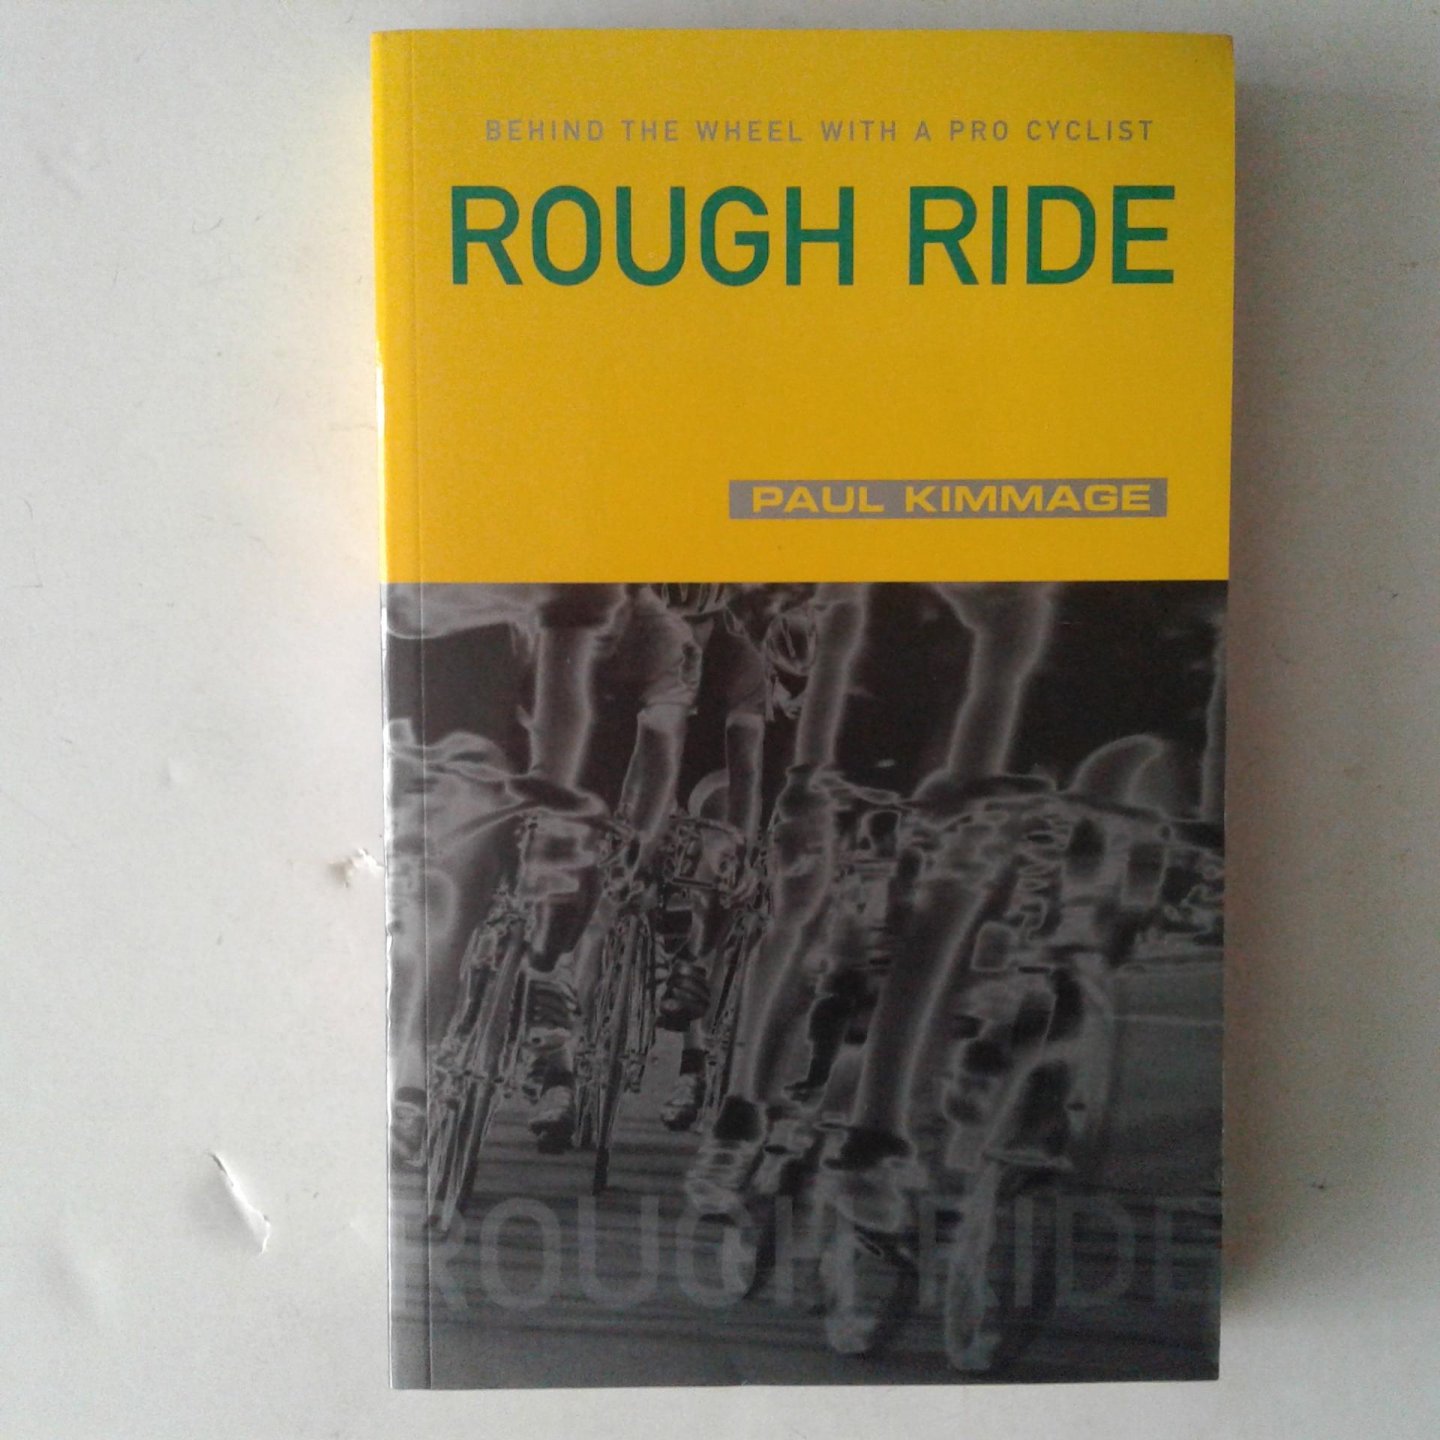 Kimmage, Paul - Rough Ride  ; Behind the Wheel with a Pro Cyclist